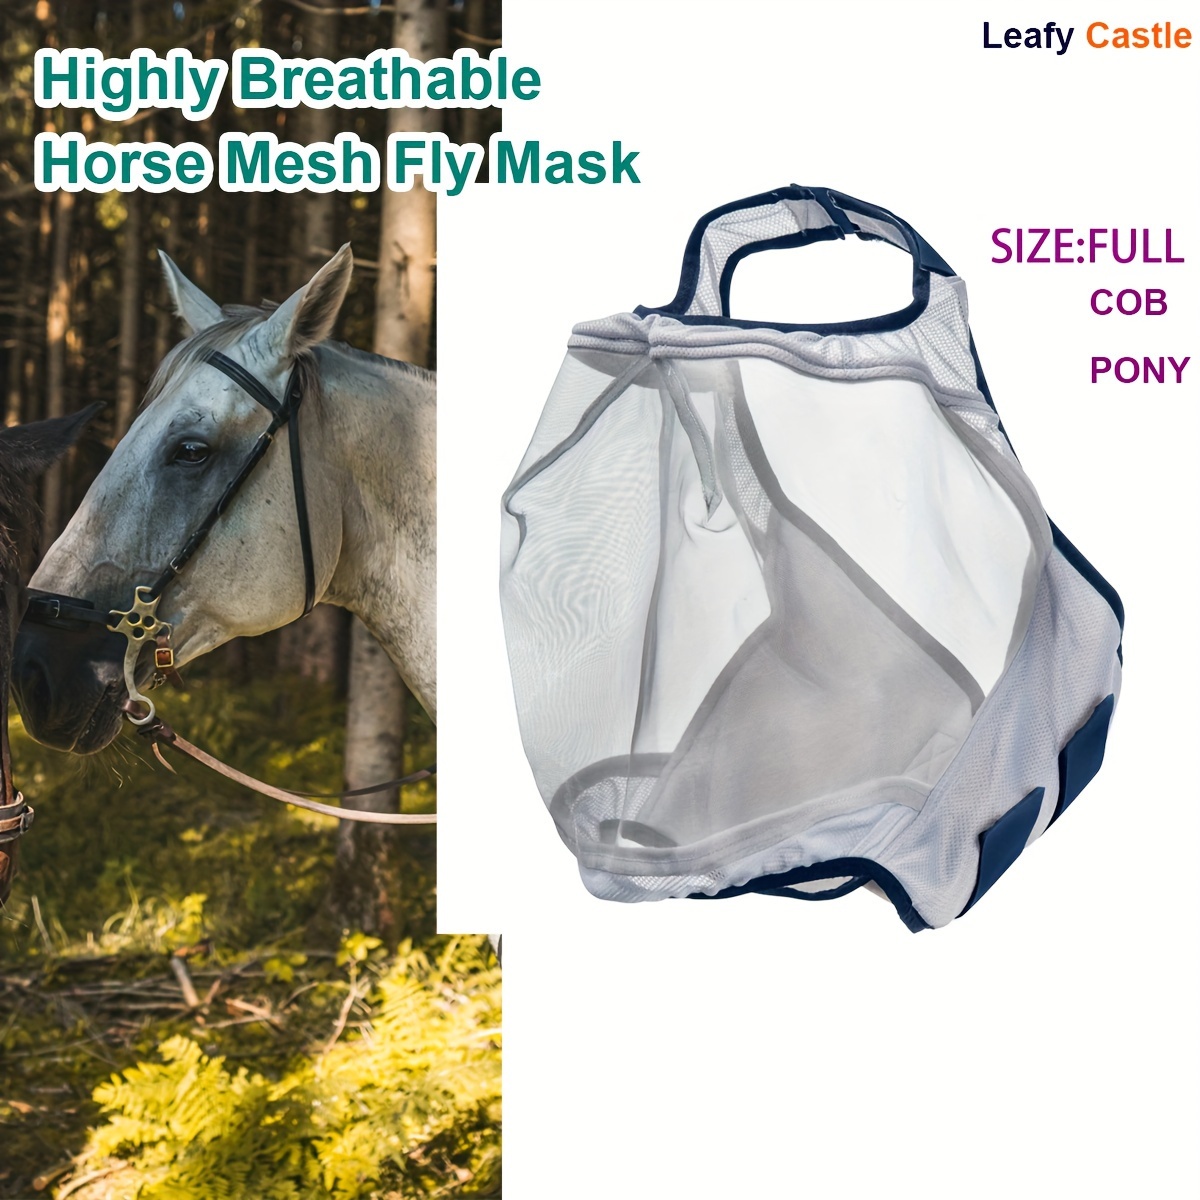 

Horse Face Mask, Fly Proof Mesh Face Cover Headgear